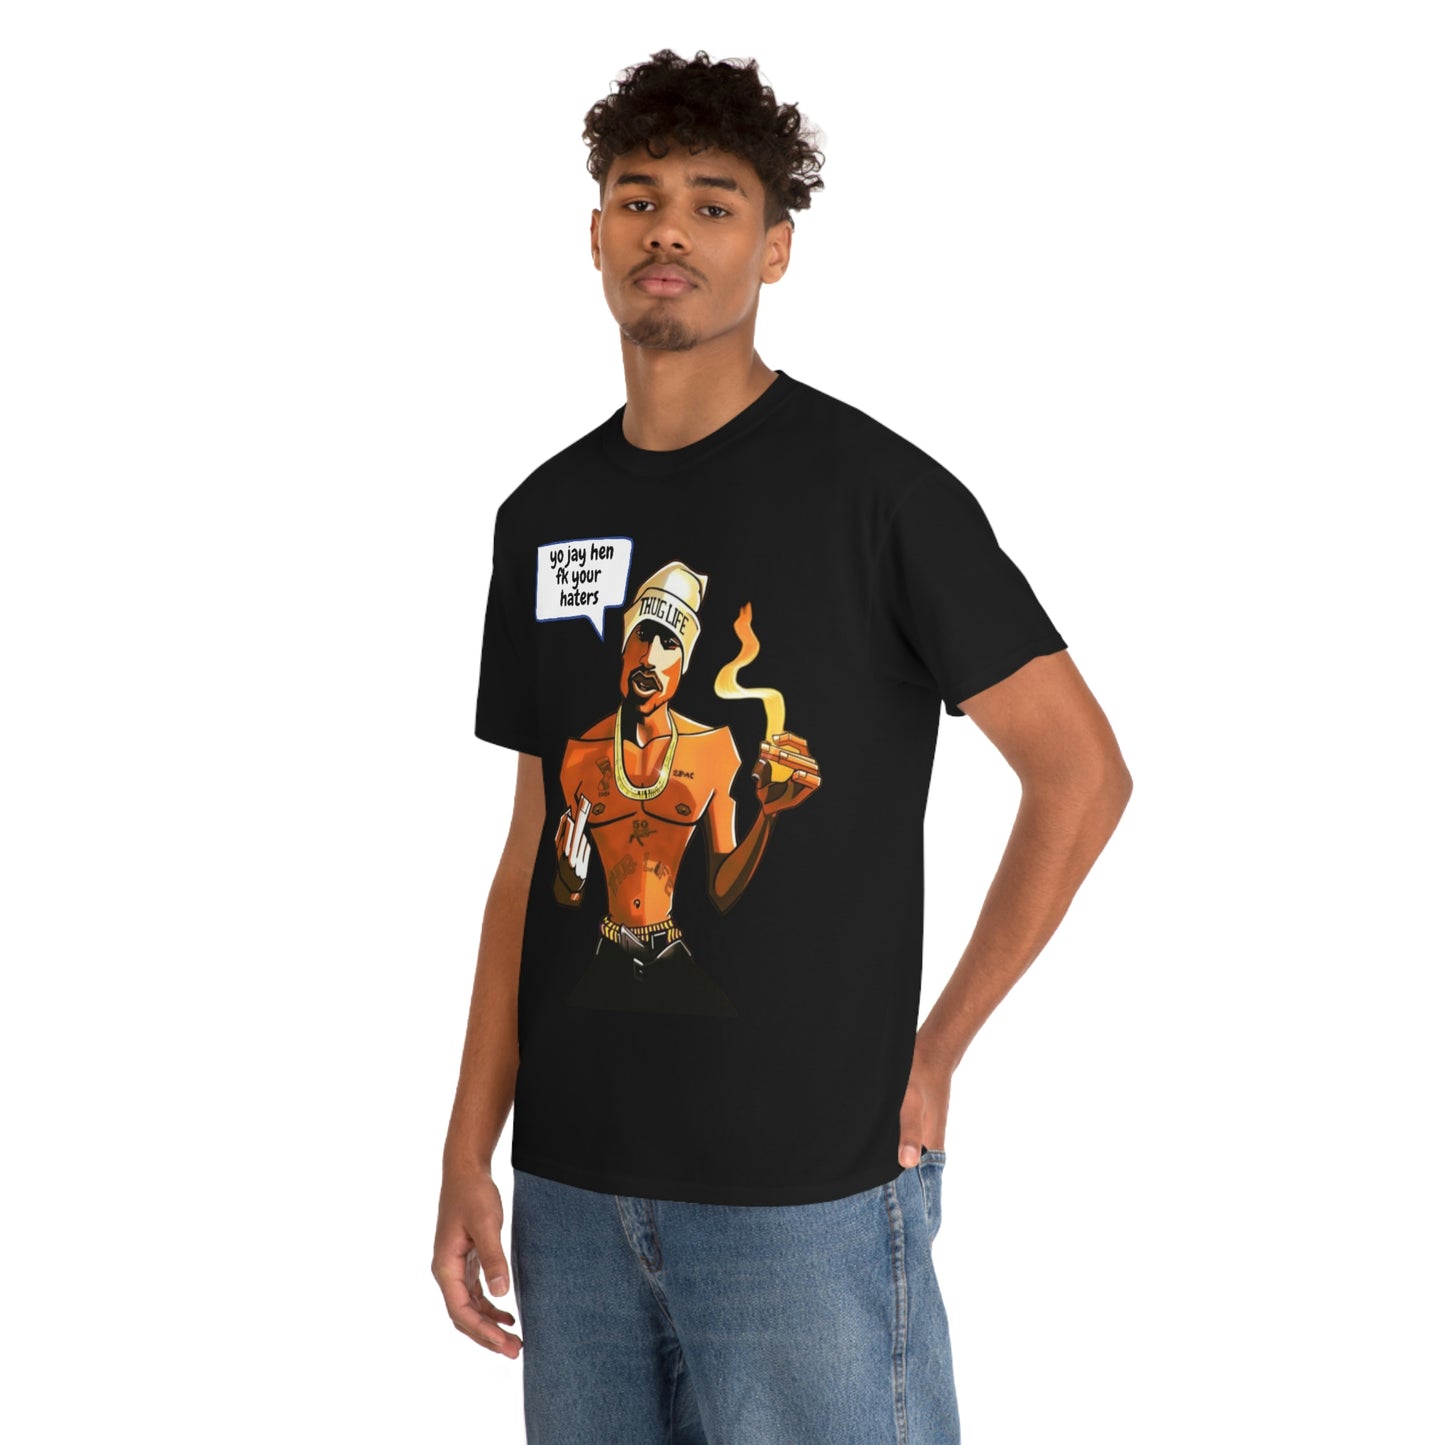 Tupac Fk Your Haters Cotton Tee - Add Your Own Name